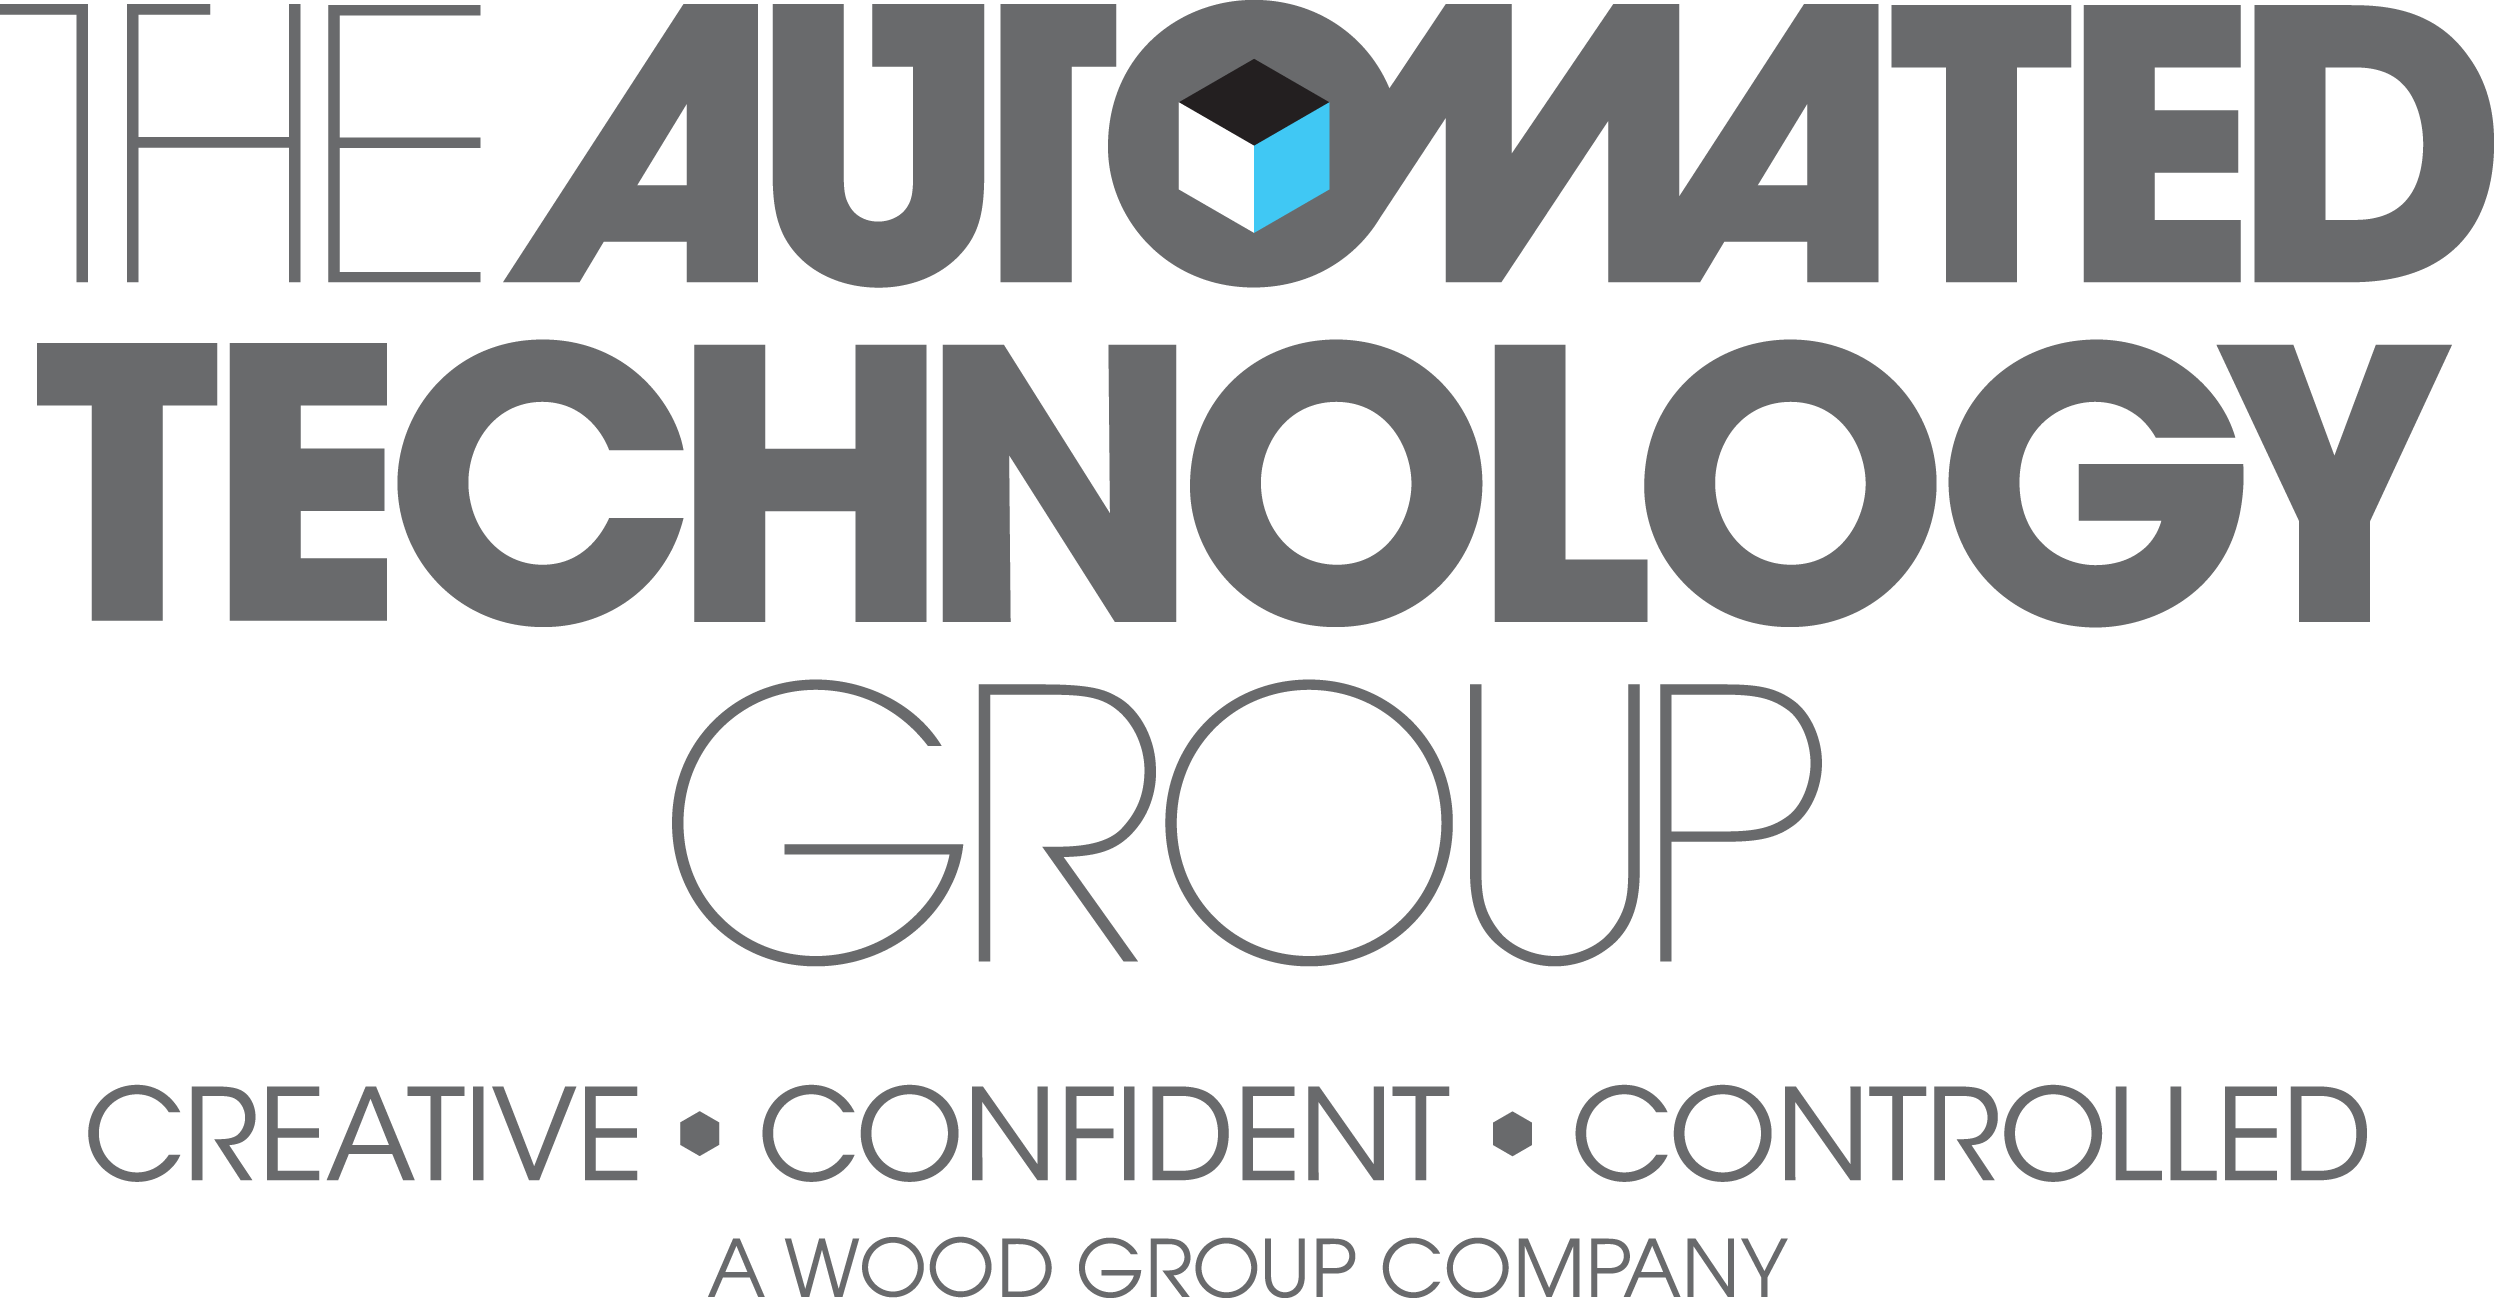 The Automated Technology Group Ltd